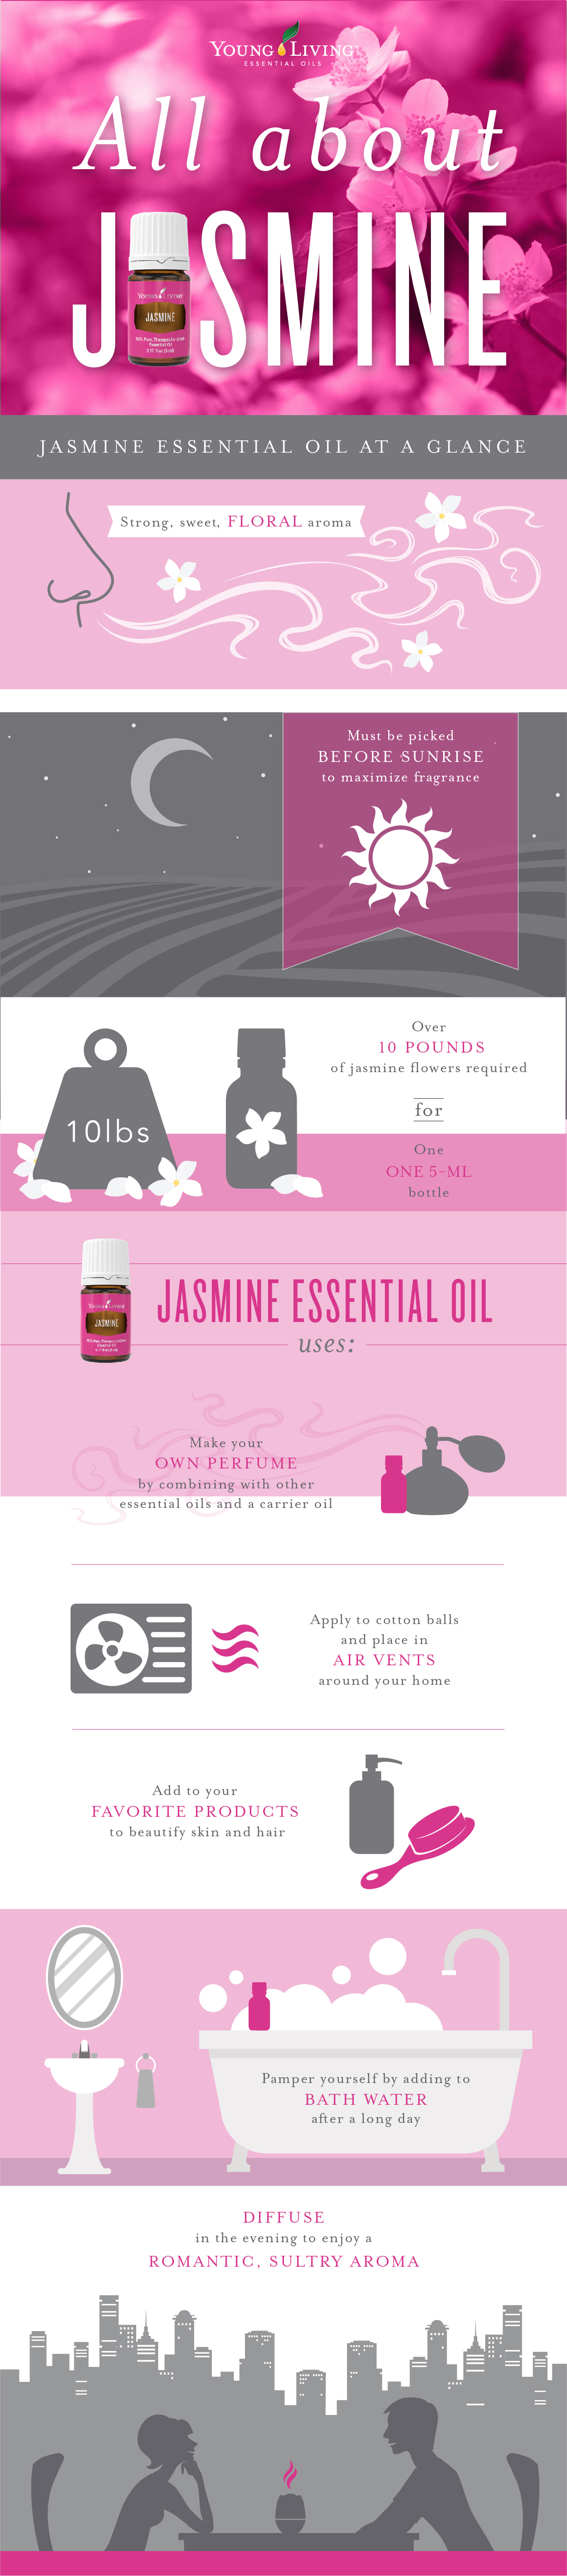 All About Jasmine Infographic